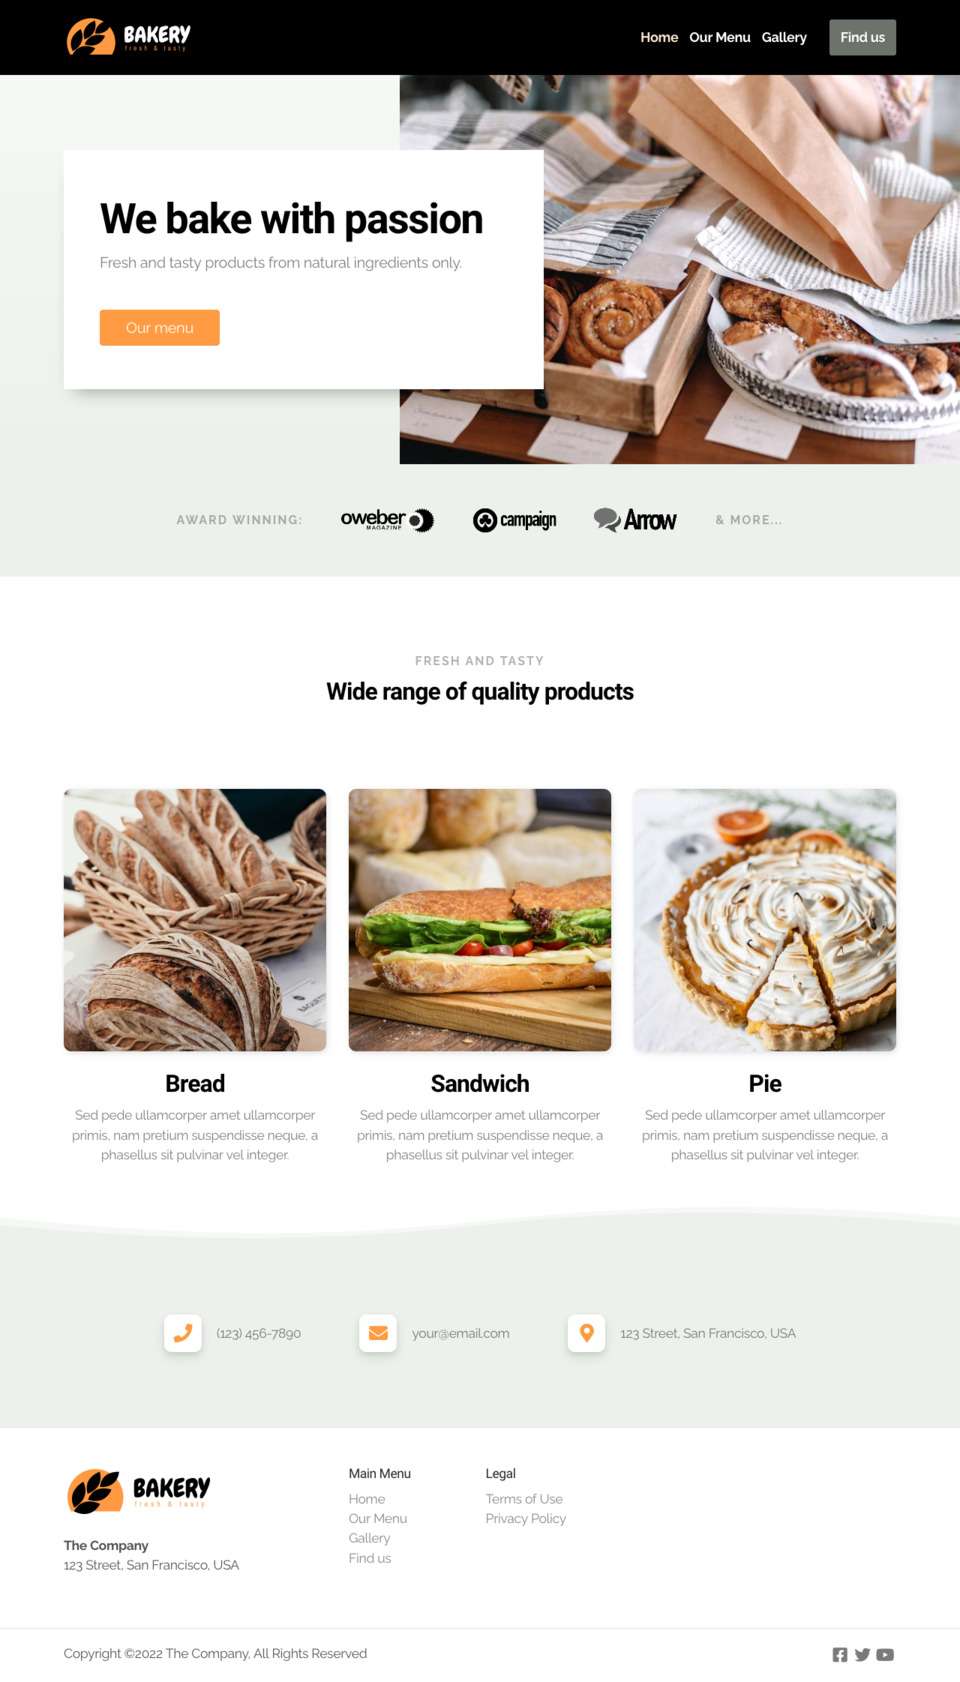 Bakery Website Template - Perfect for small businesses in the bakery, bread, or food industry looking for an easy-to-use website builder with no coding required.